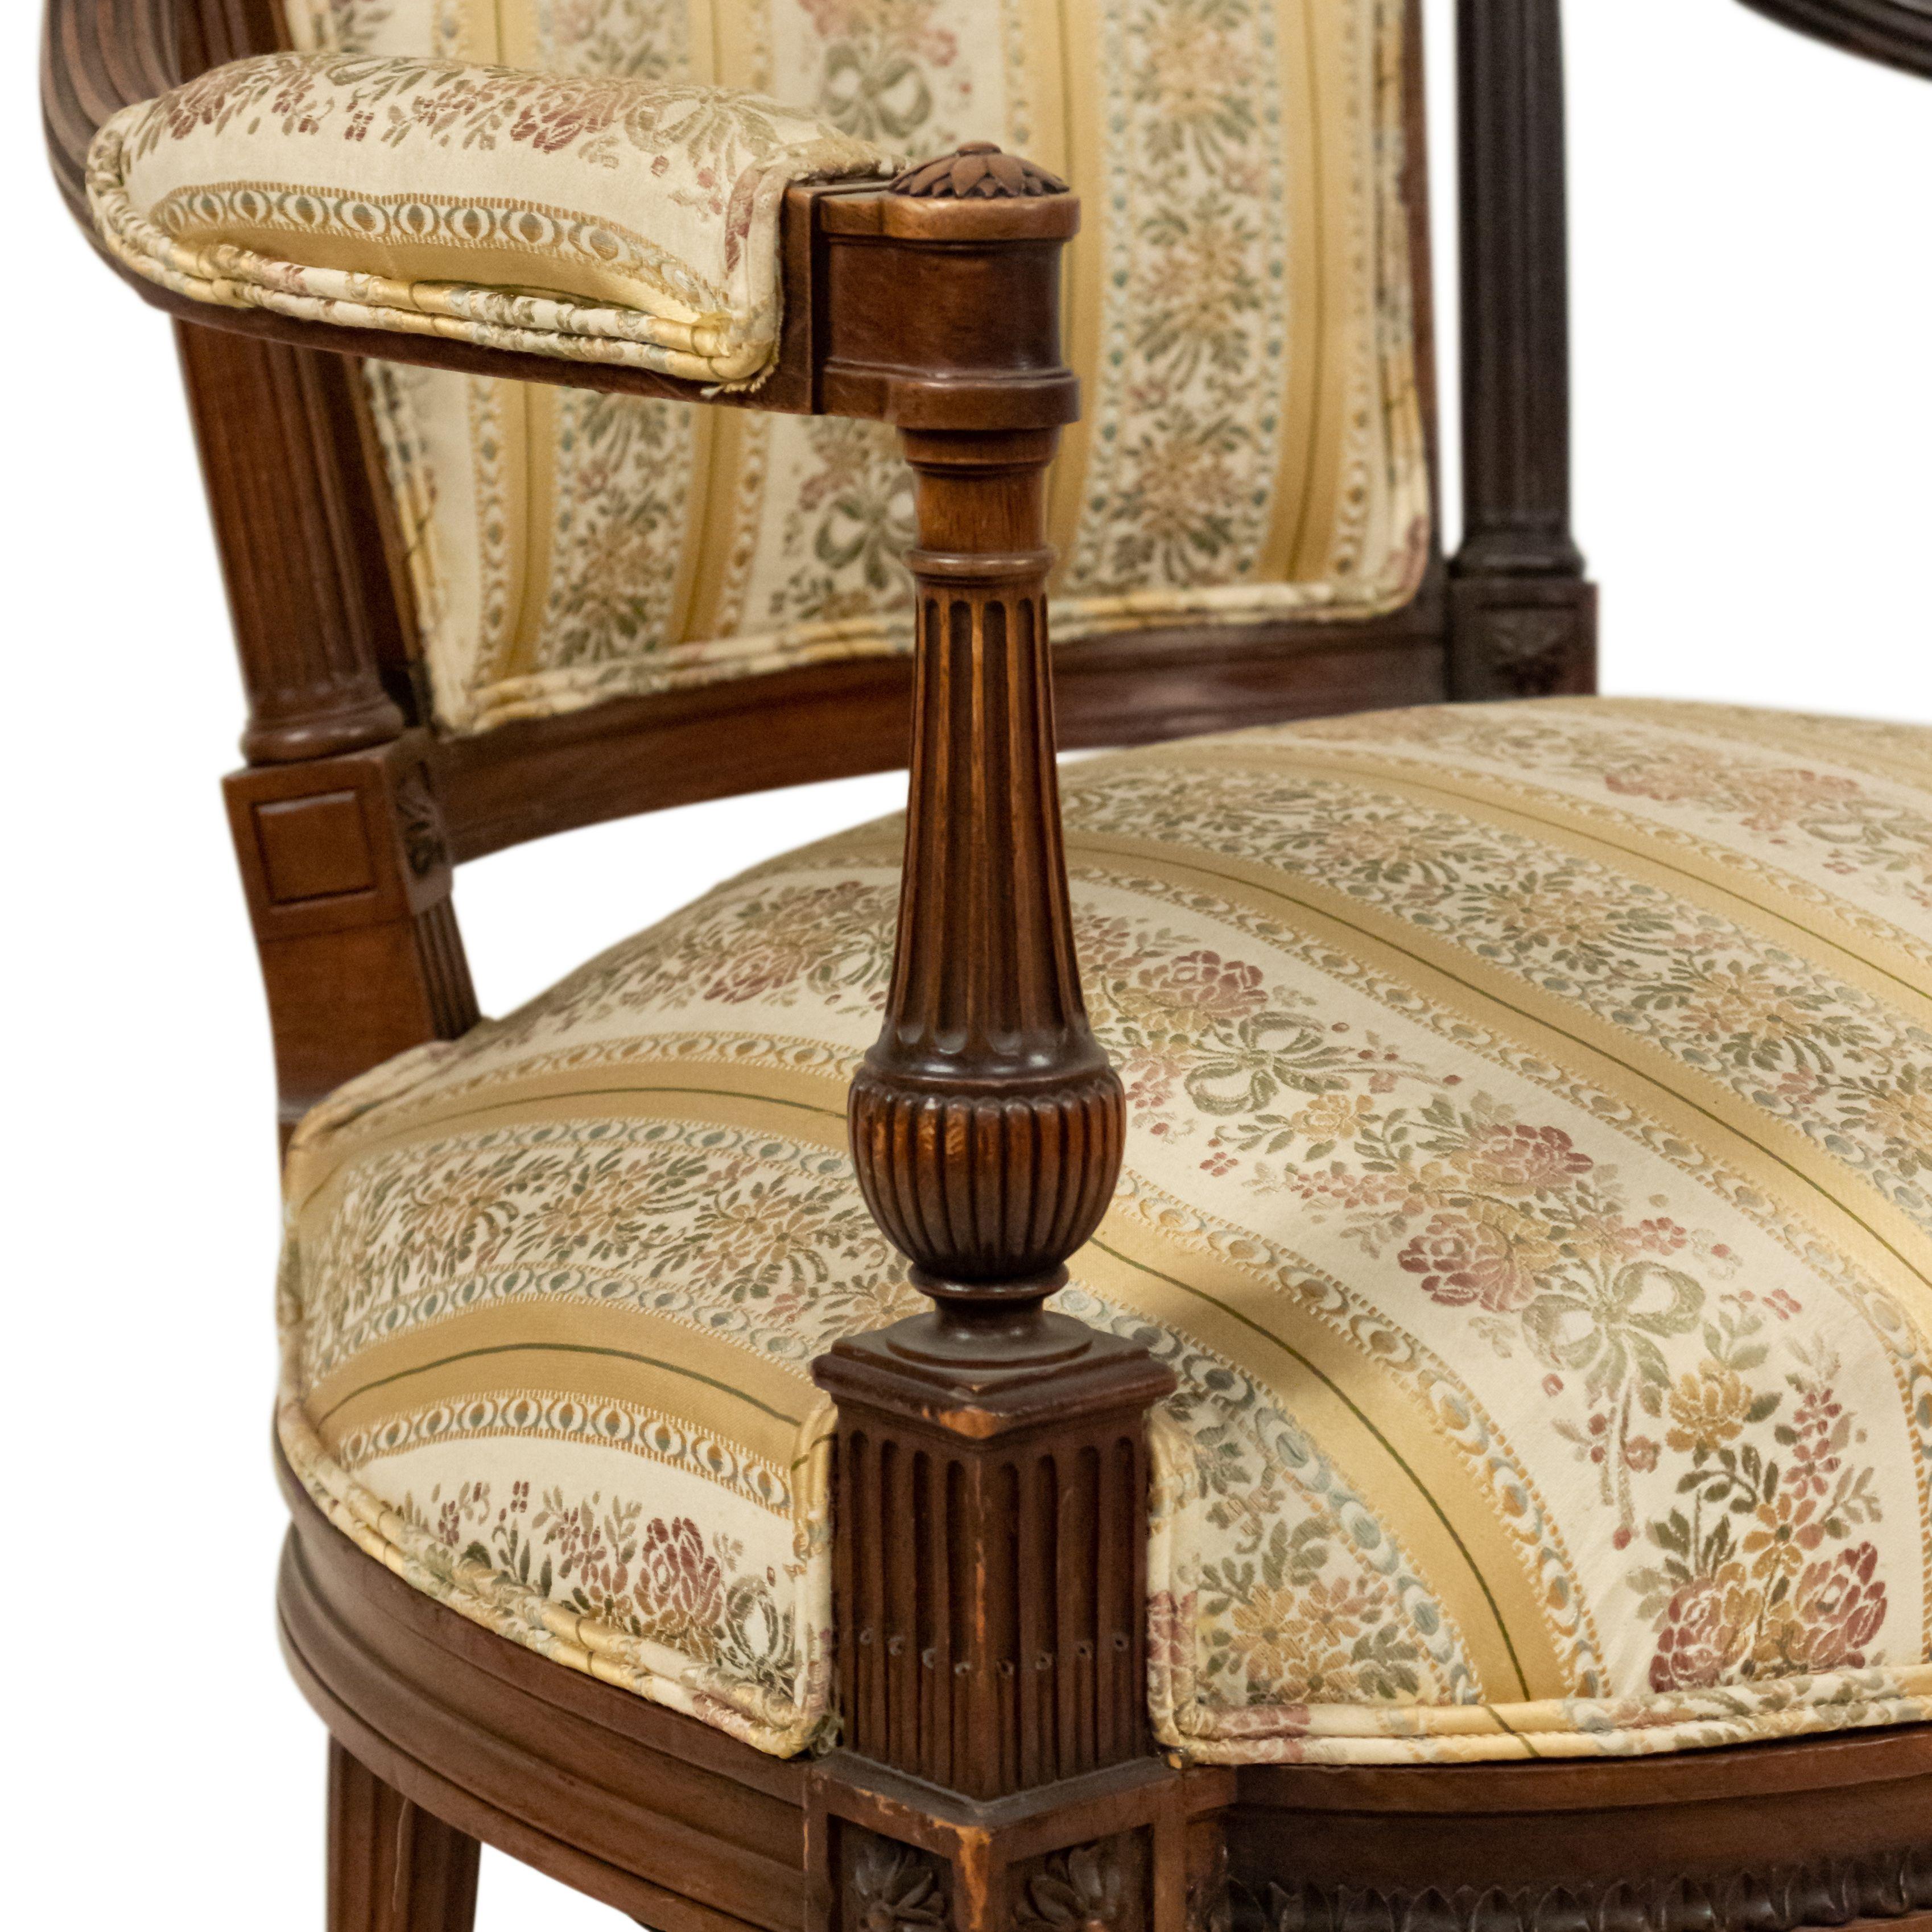 Set of 4 French Louis XVI style walnut arm chairs with striped upholstered seat and back. (19/20th Cent.).
 